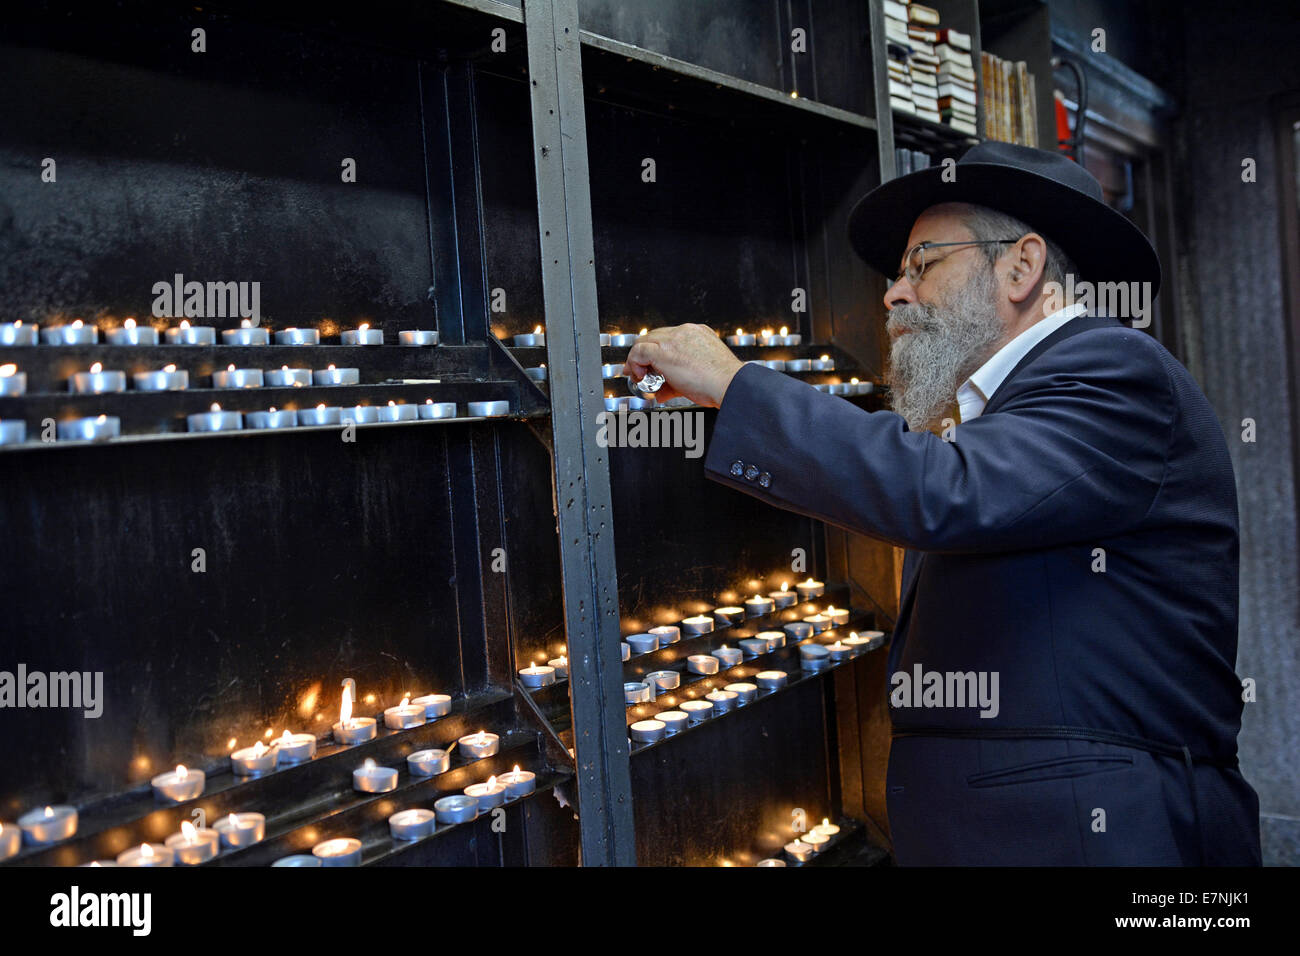 Religious Jewish man lights a candle prior to visiting the grave of the Lubavitcher Rebbe in Cambria Heights, Queens, New York Stock Photo